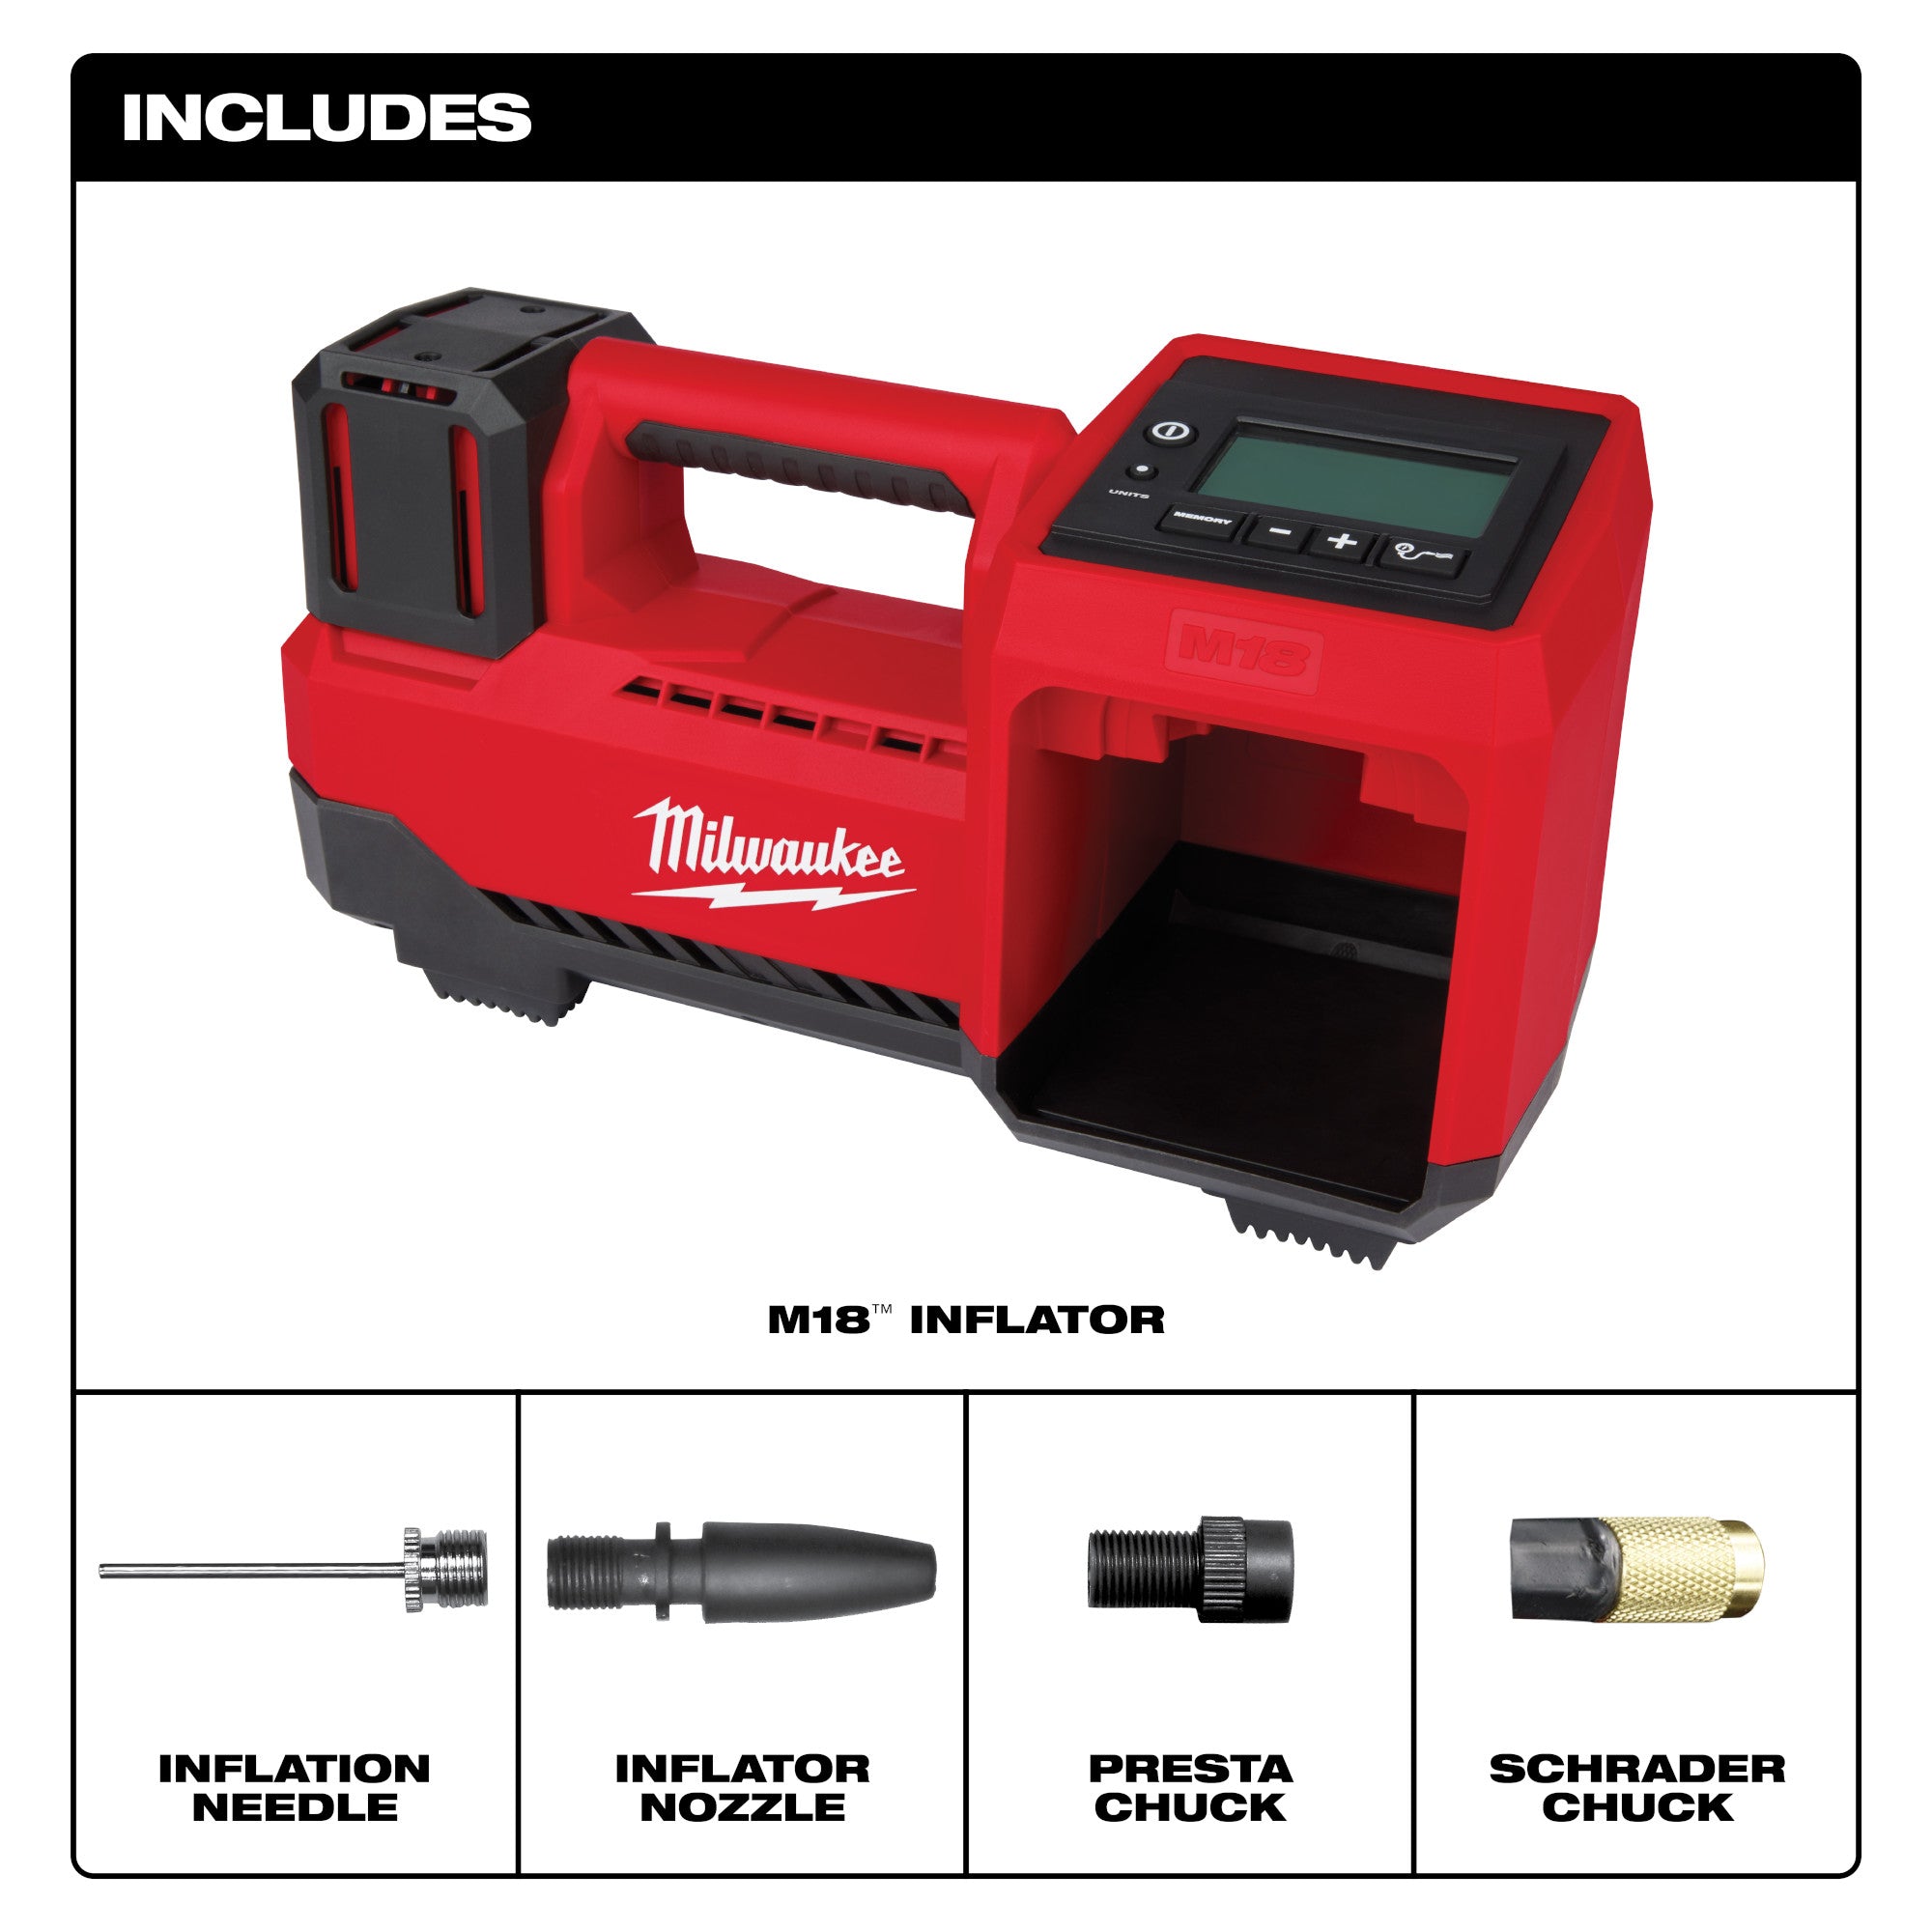 M18 Inflator (Tool Only)